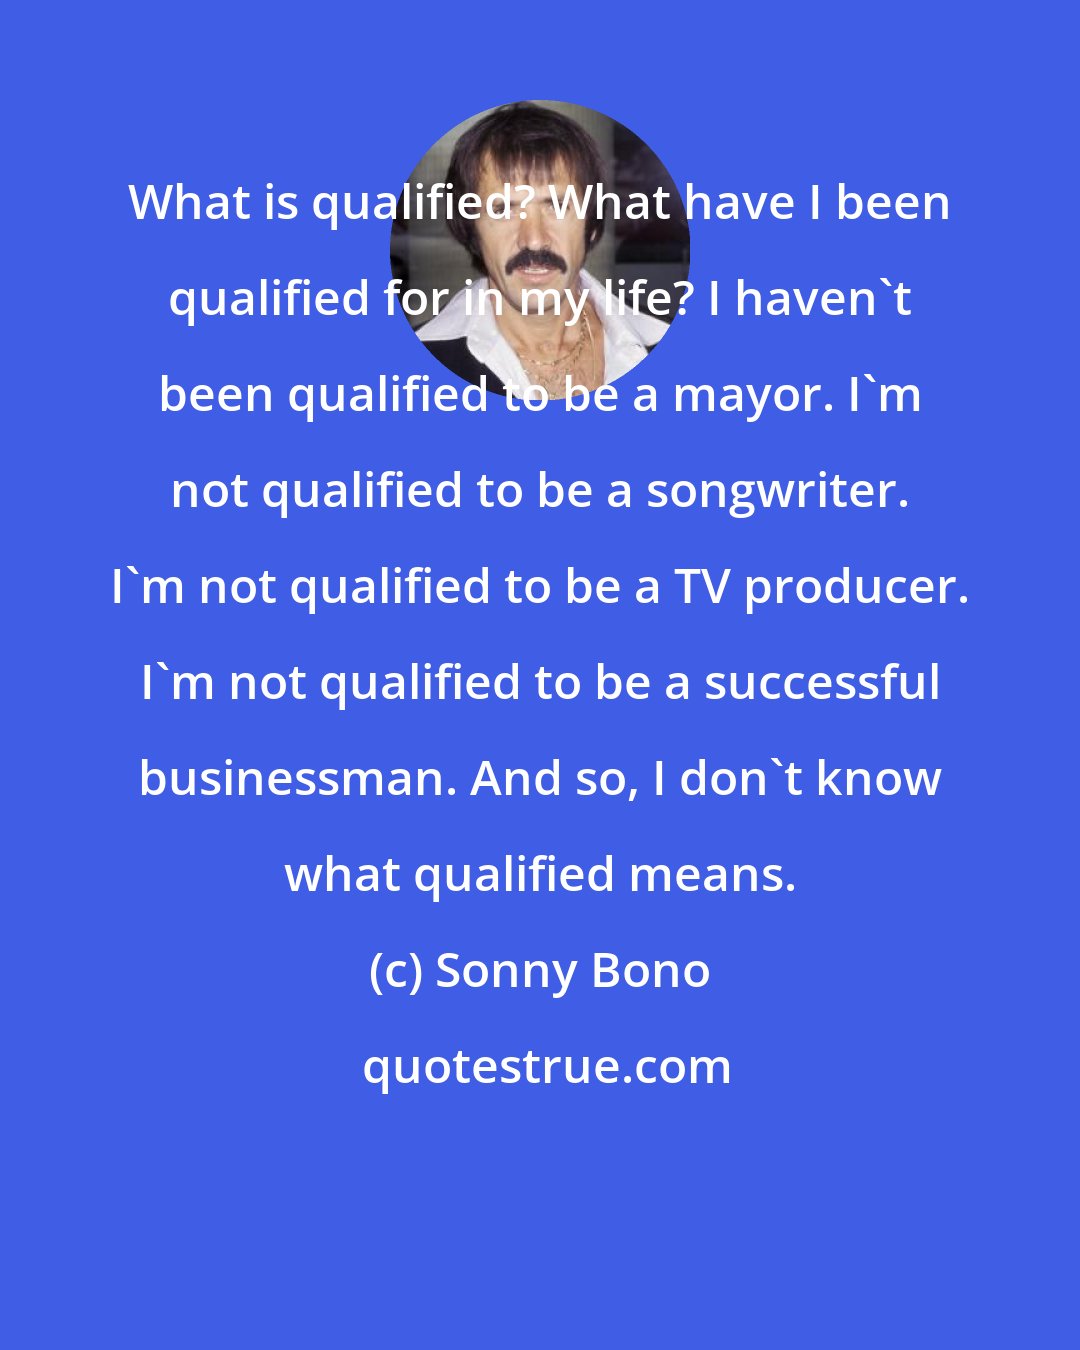 Sonny Bono: What is qualified? What have I been qualified for in my life? I haven't been qualified to be a mayor. I'm not qualified to be a songwriter. I'm not qualified to be a TV producer. I'm not qualified to be a successful businessman. And so, I don't know what qualified means.